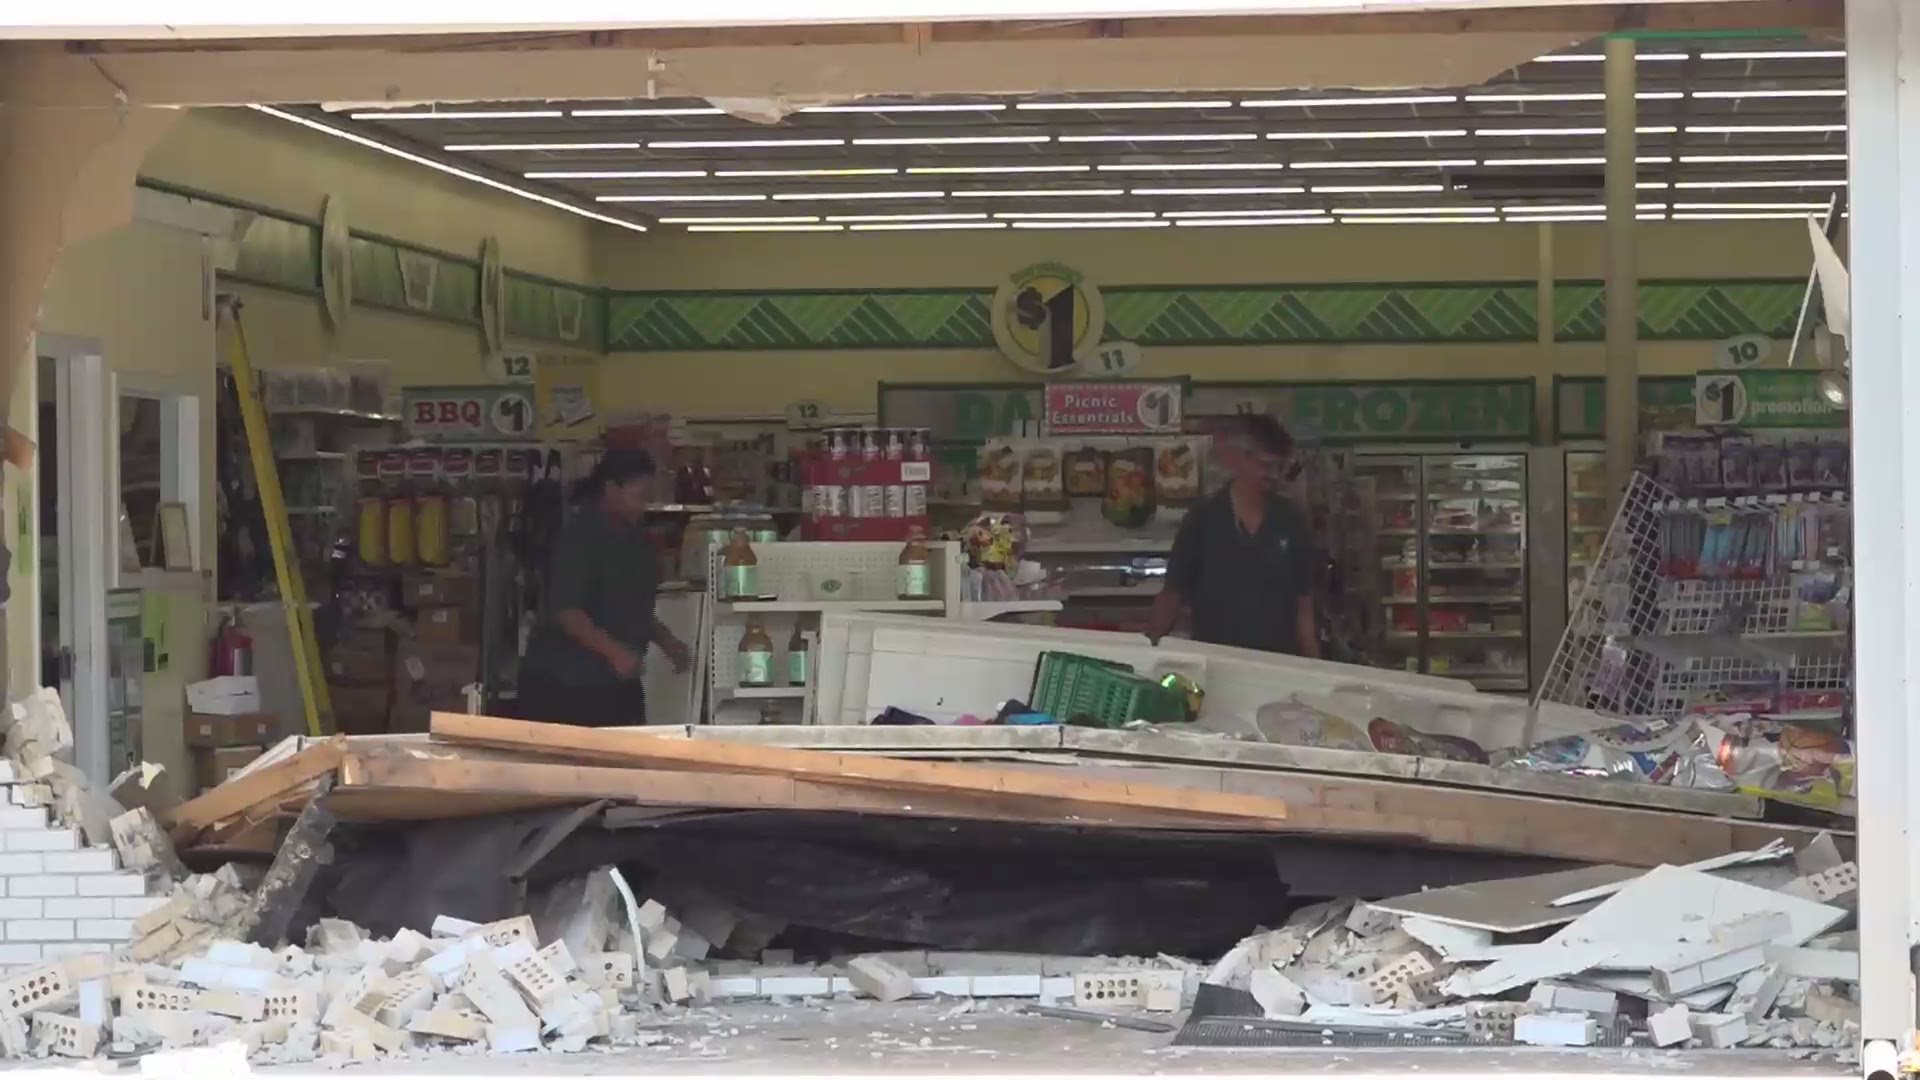 Police say a young driver accidentally went through the front of the store on Rosewood Drive.